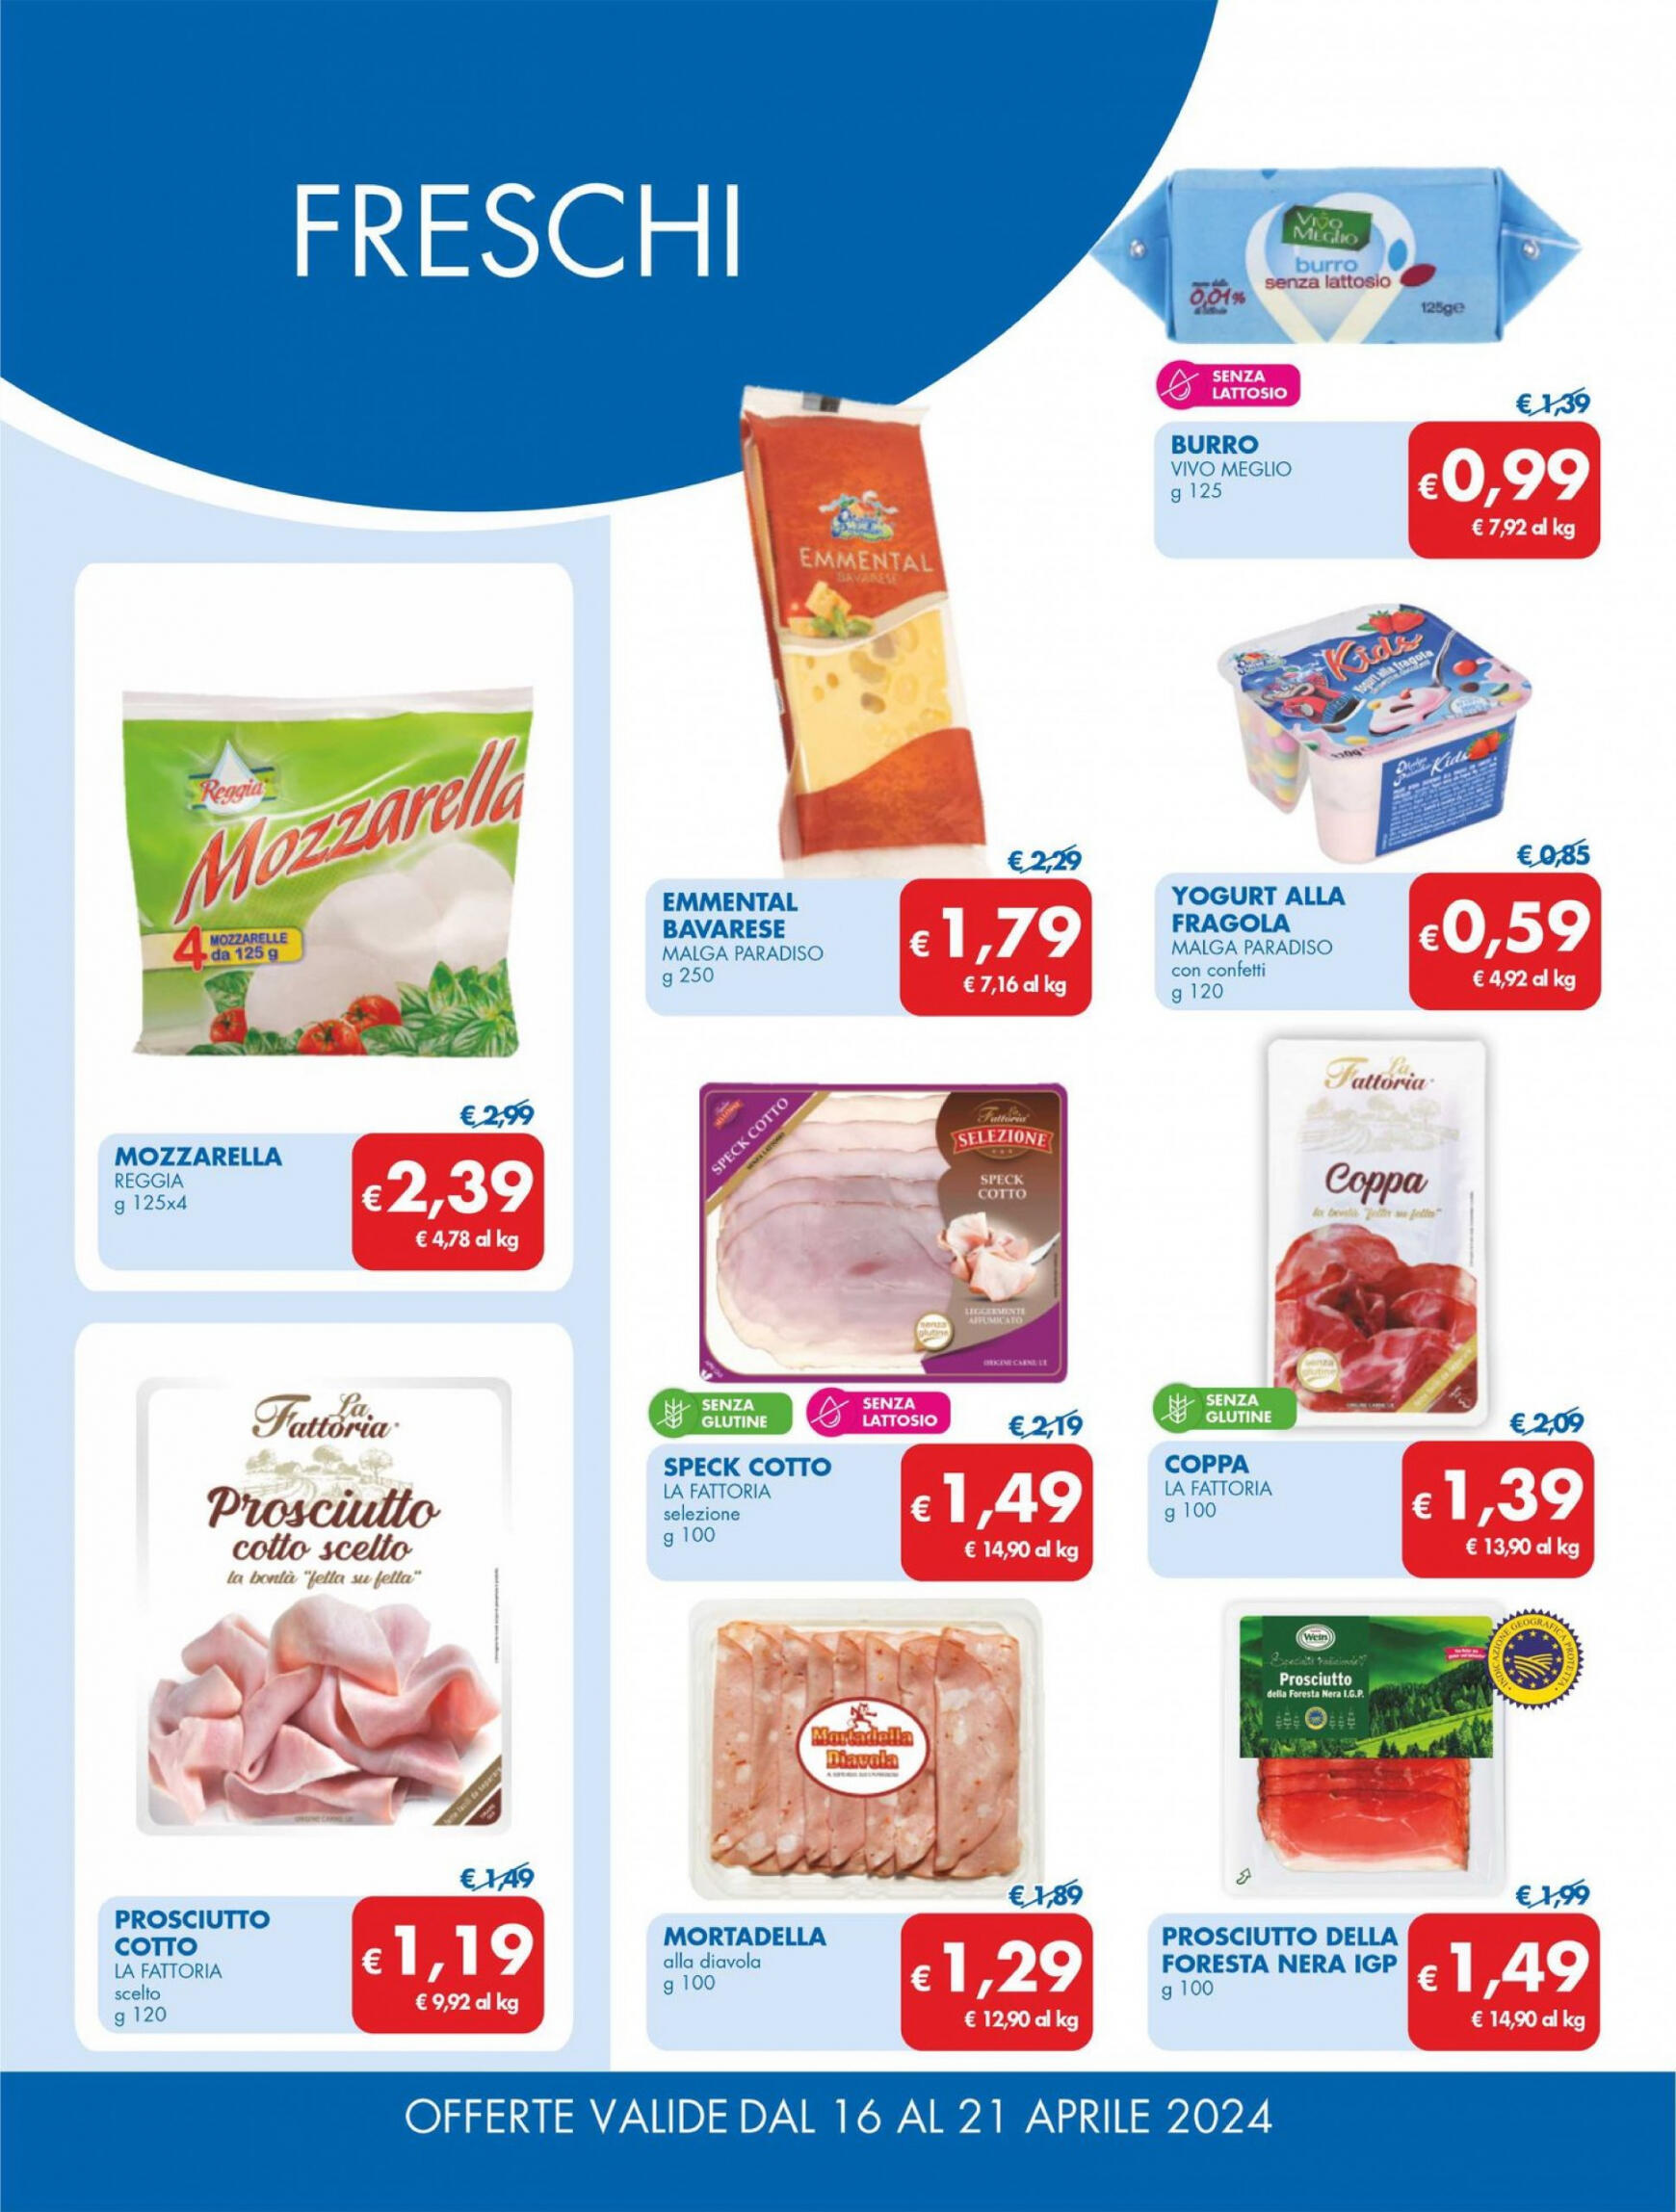 md-discount - Nuovo volantino MD 16.04. - 21.04. - page: 12